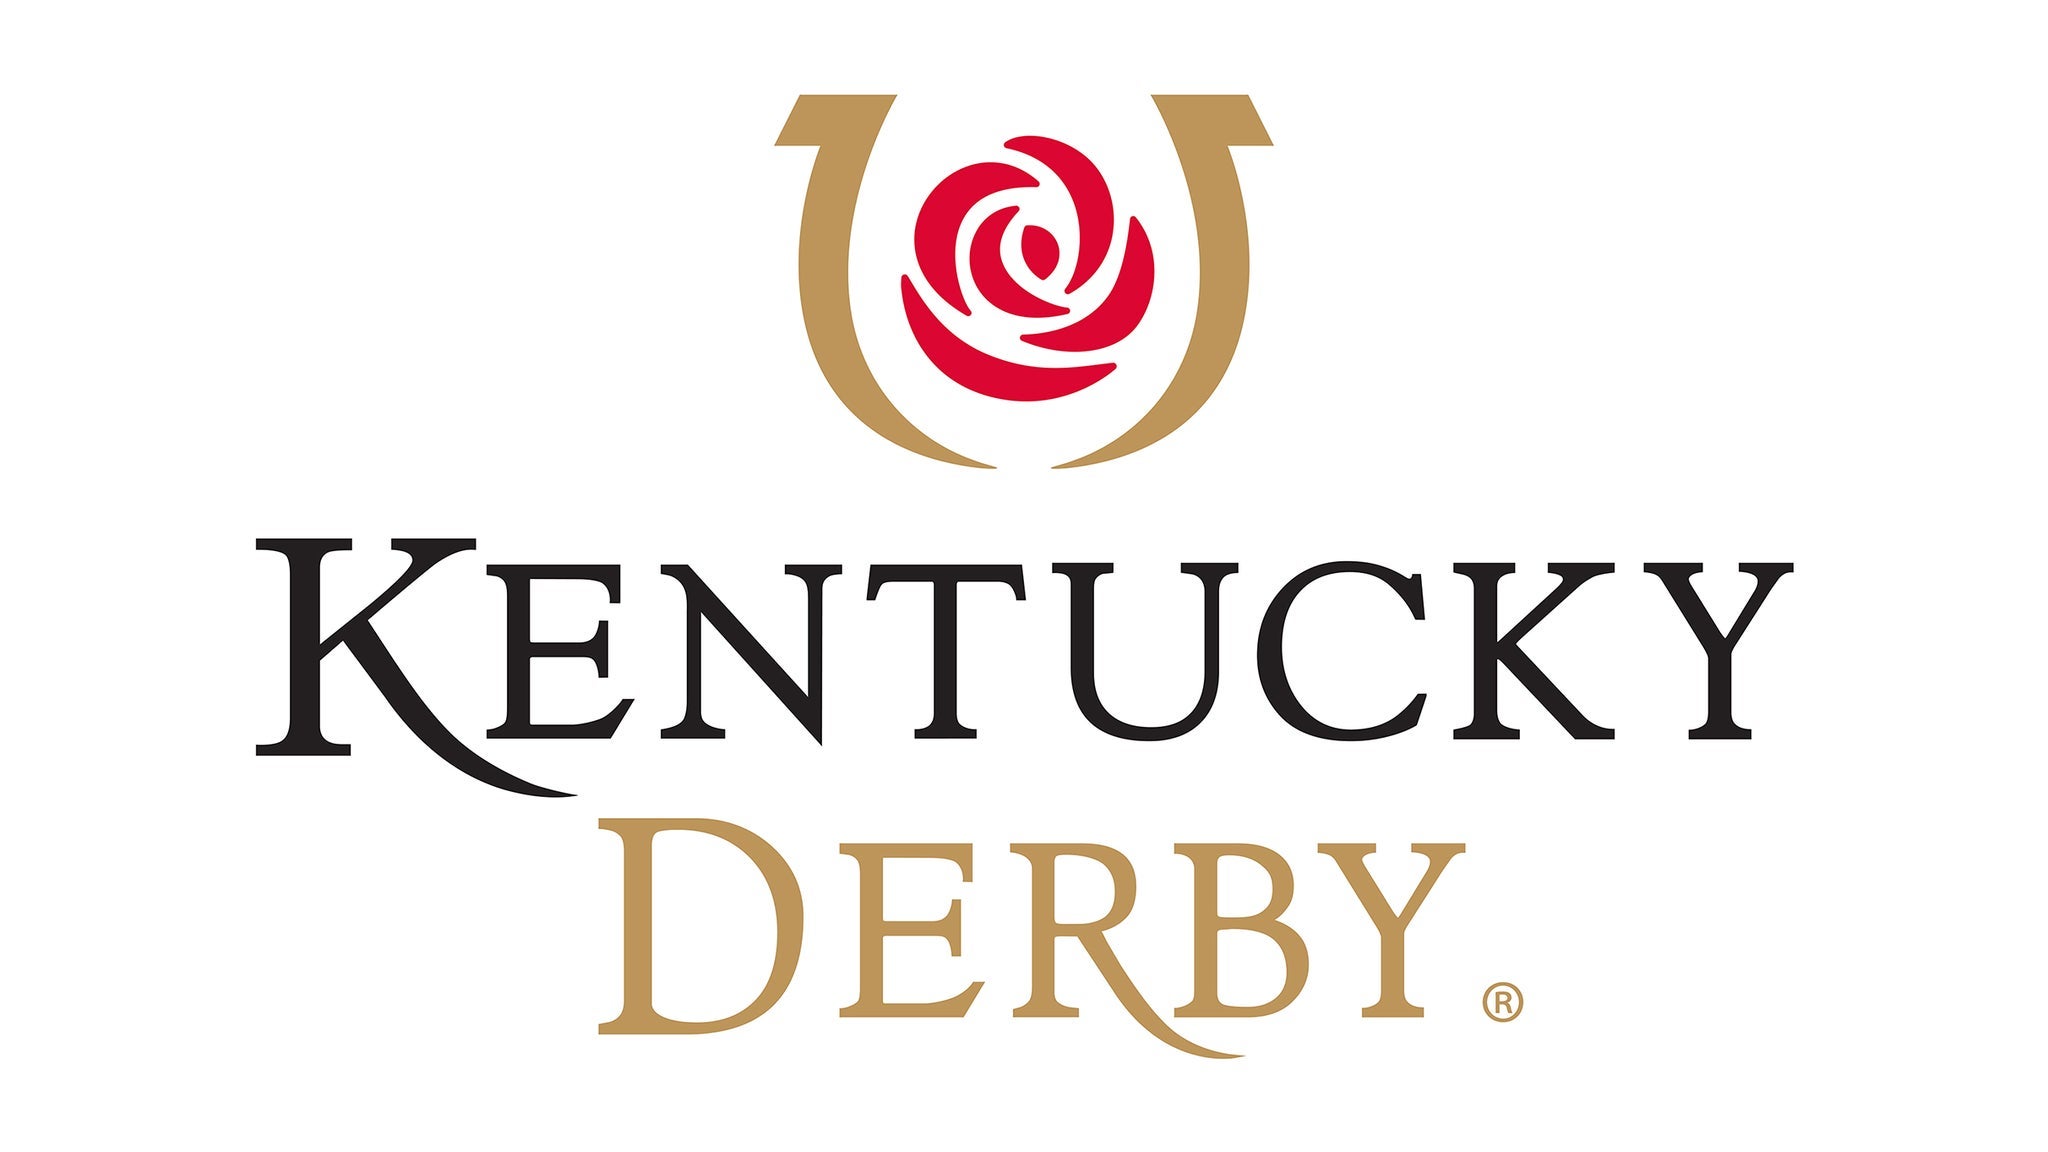 149th Kentucky Derby - Dining and Hospitality